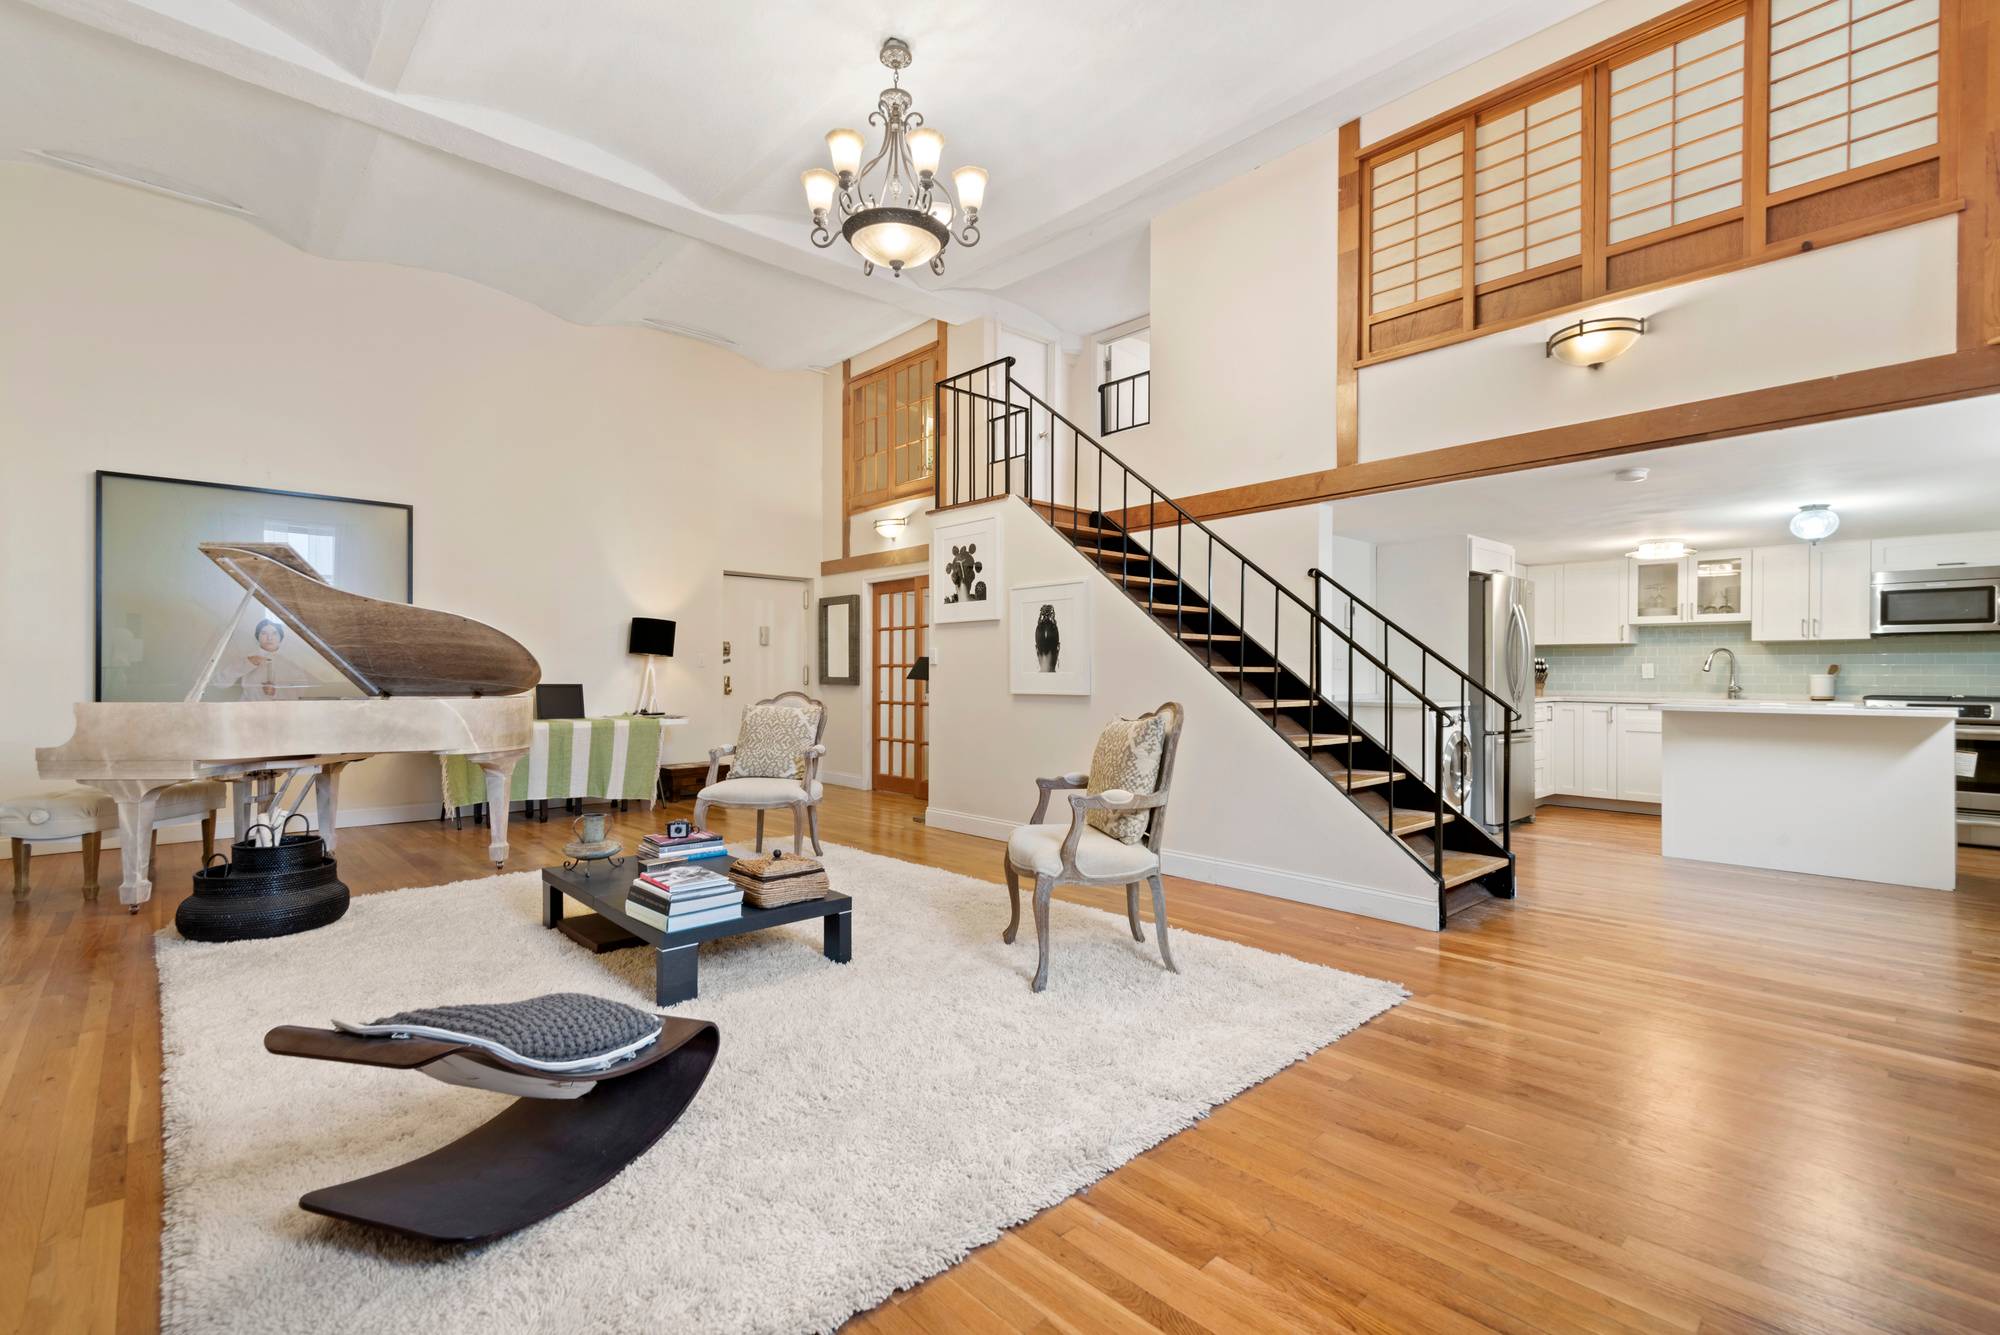 Magnolia Mansion is an 1800's school house converted to luxury condominium lofts featuring 15 ft ceilings, open design, custom made oversized windows and an expansive 35 x 108 courtyard common ...